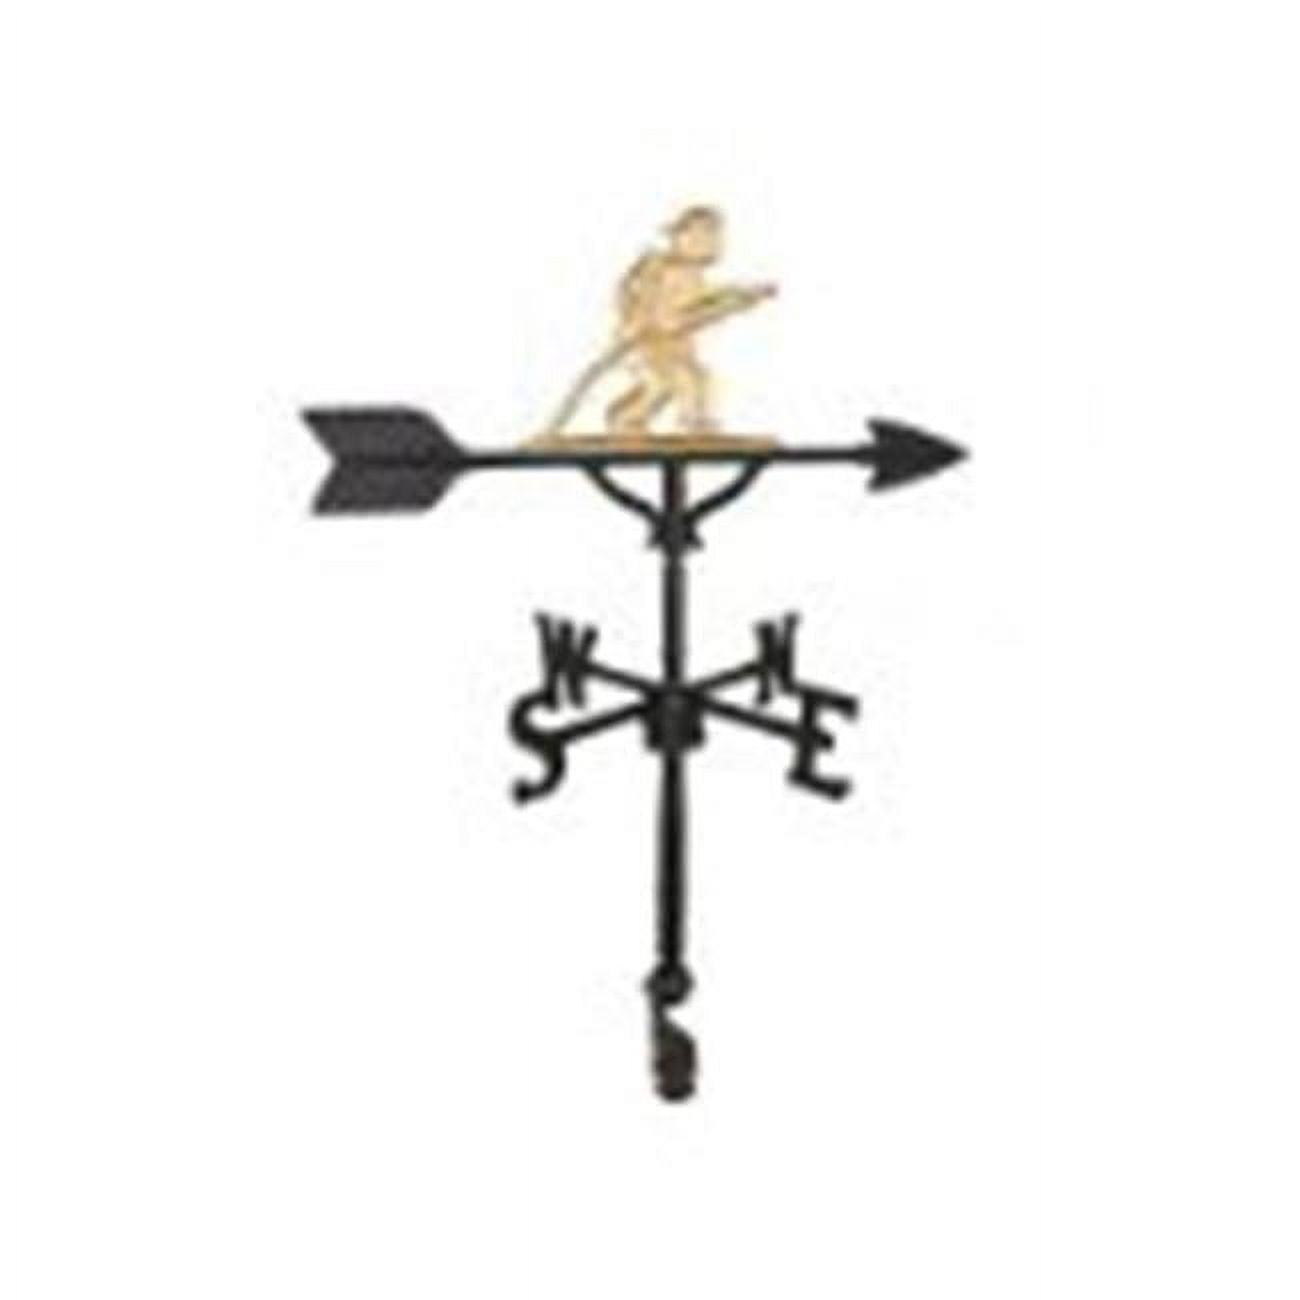 Montague Metal Products  200 Series 32 In. Gold Fireman Weathervane - image 1 of 1